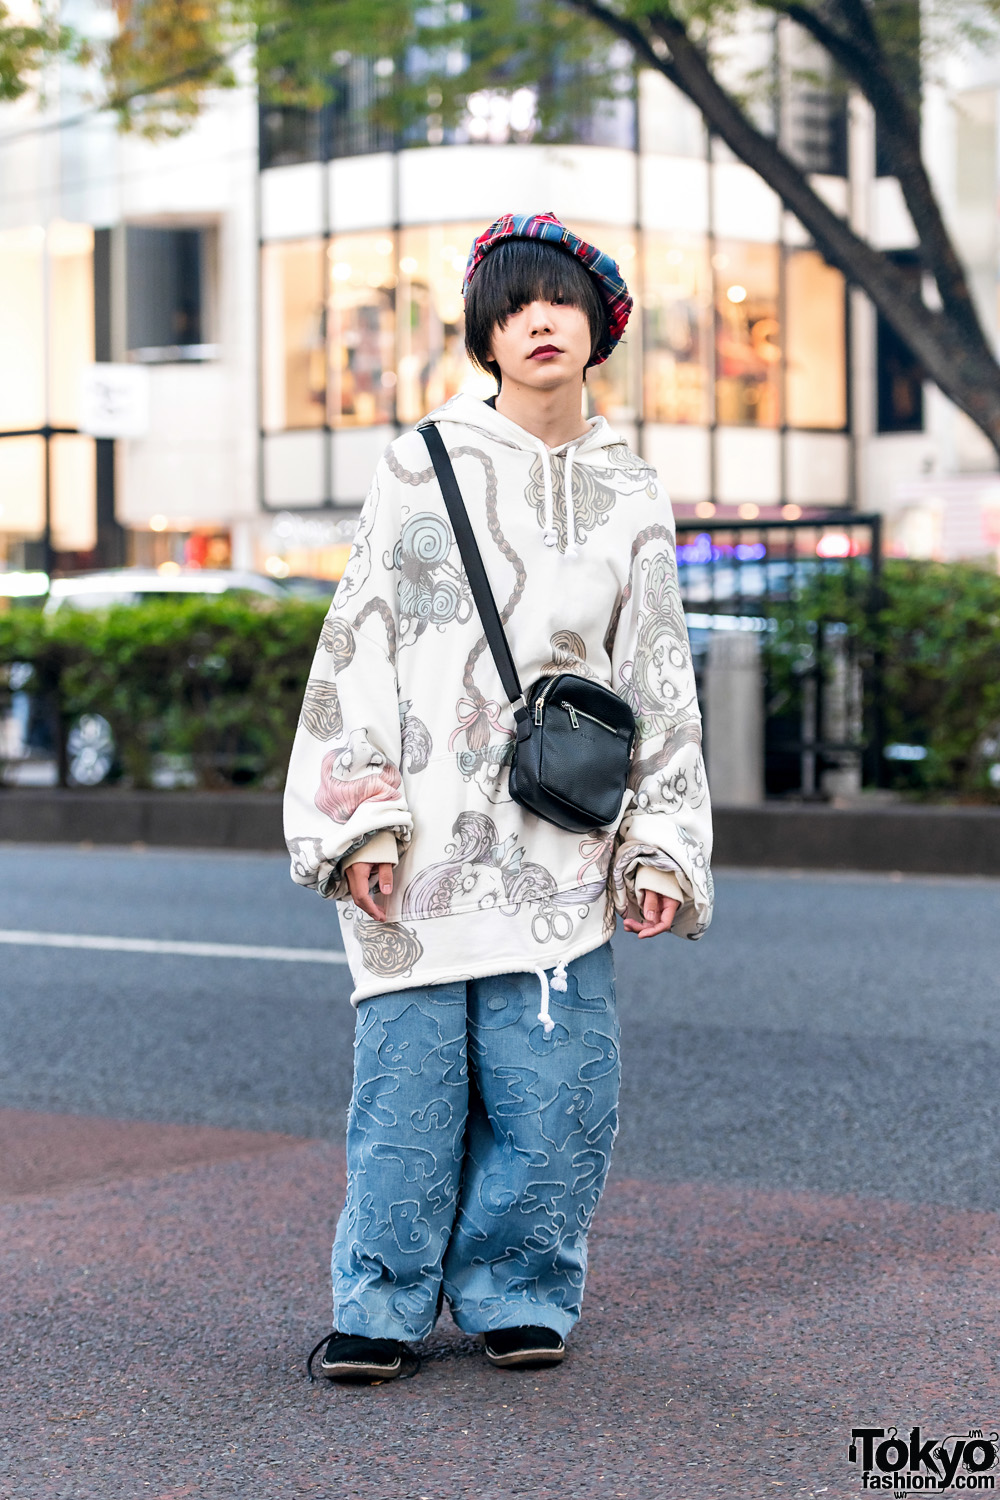 HEIHEI Oversized Street Fashion in Tokyo w/ Plaid Beret, Dark Lips, Patchwork Pants, Alive Crossbody Bag & Lee Suede Shoes